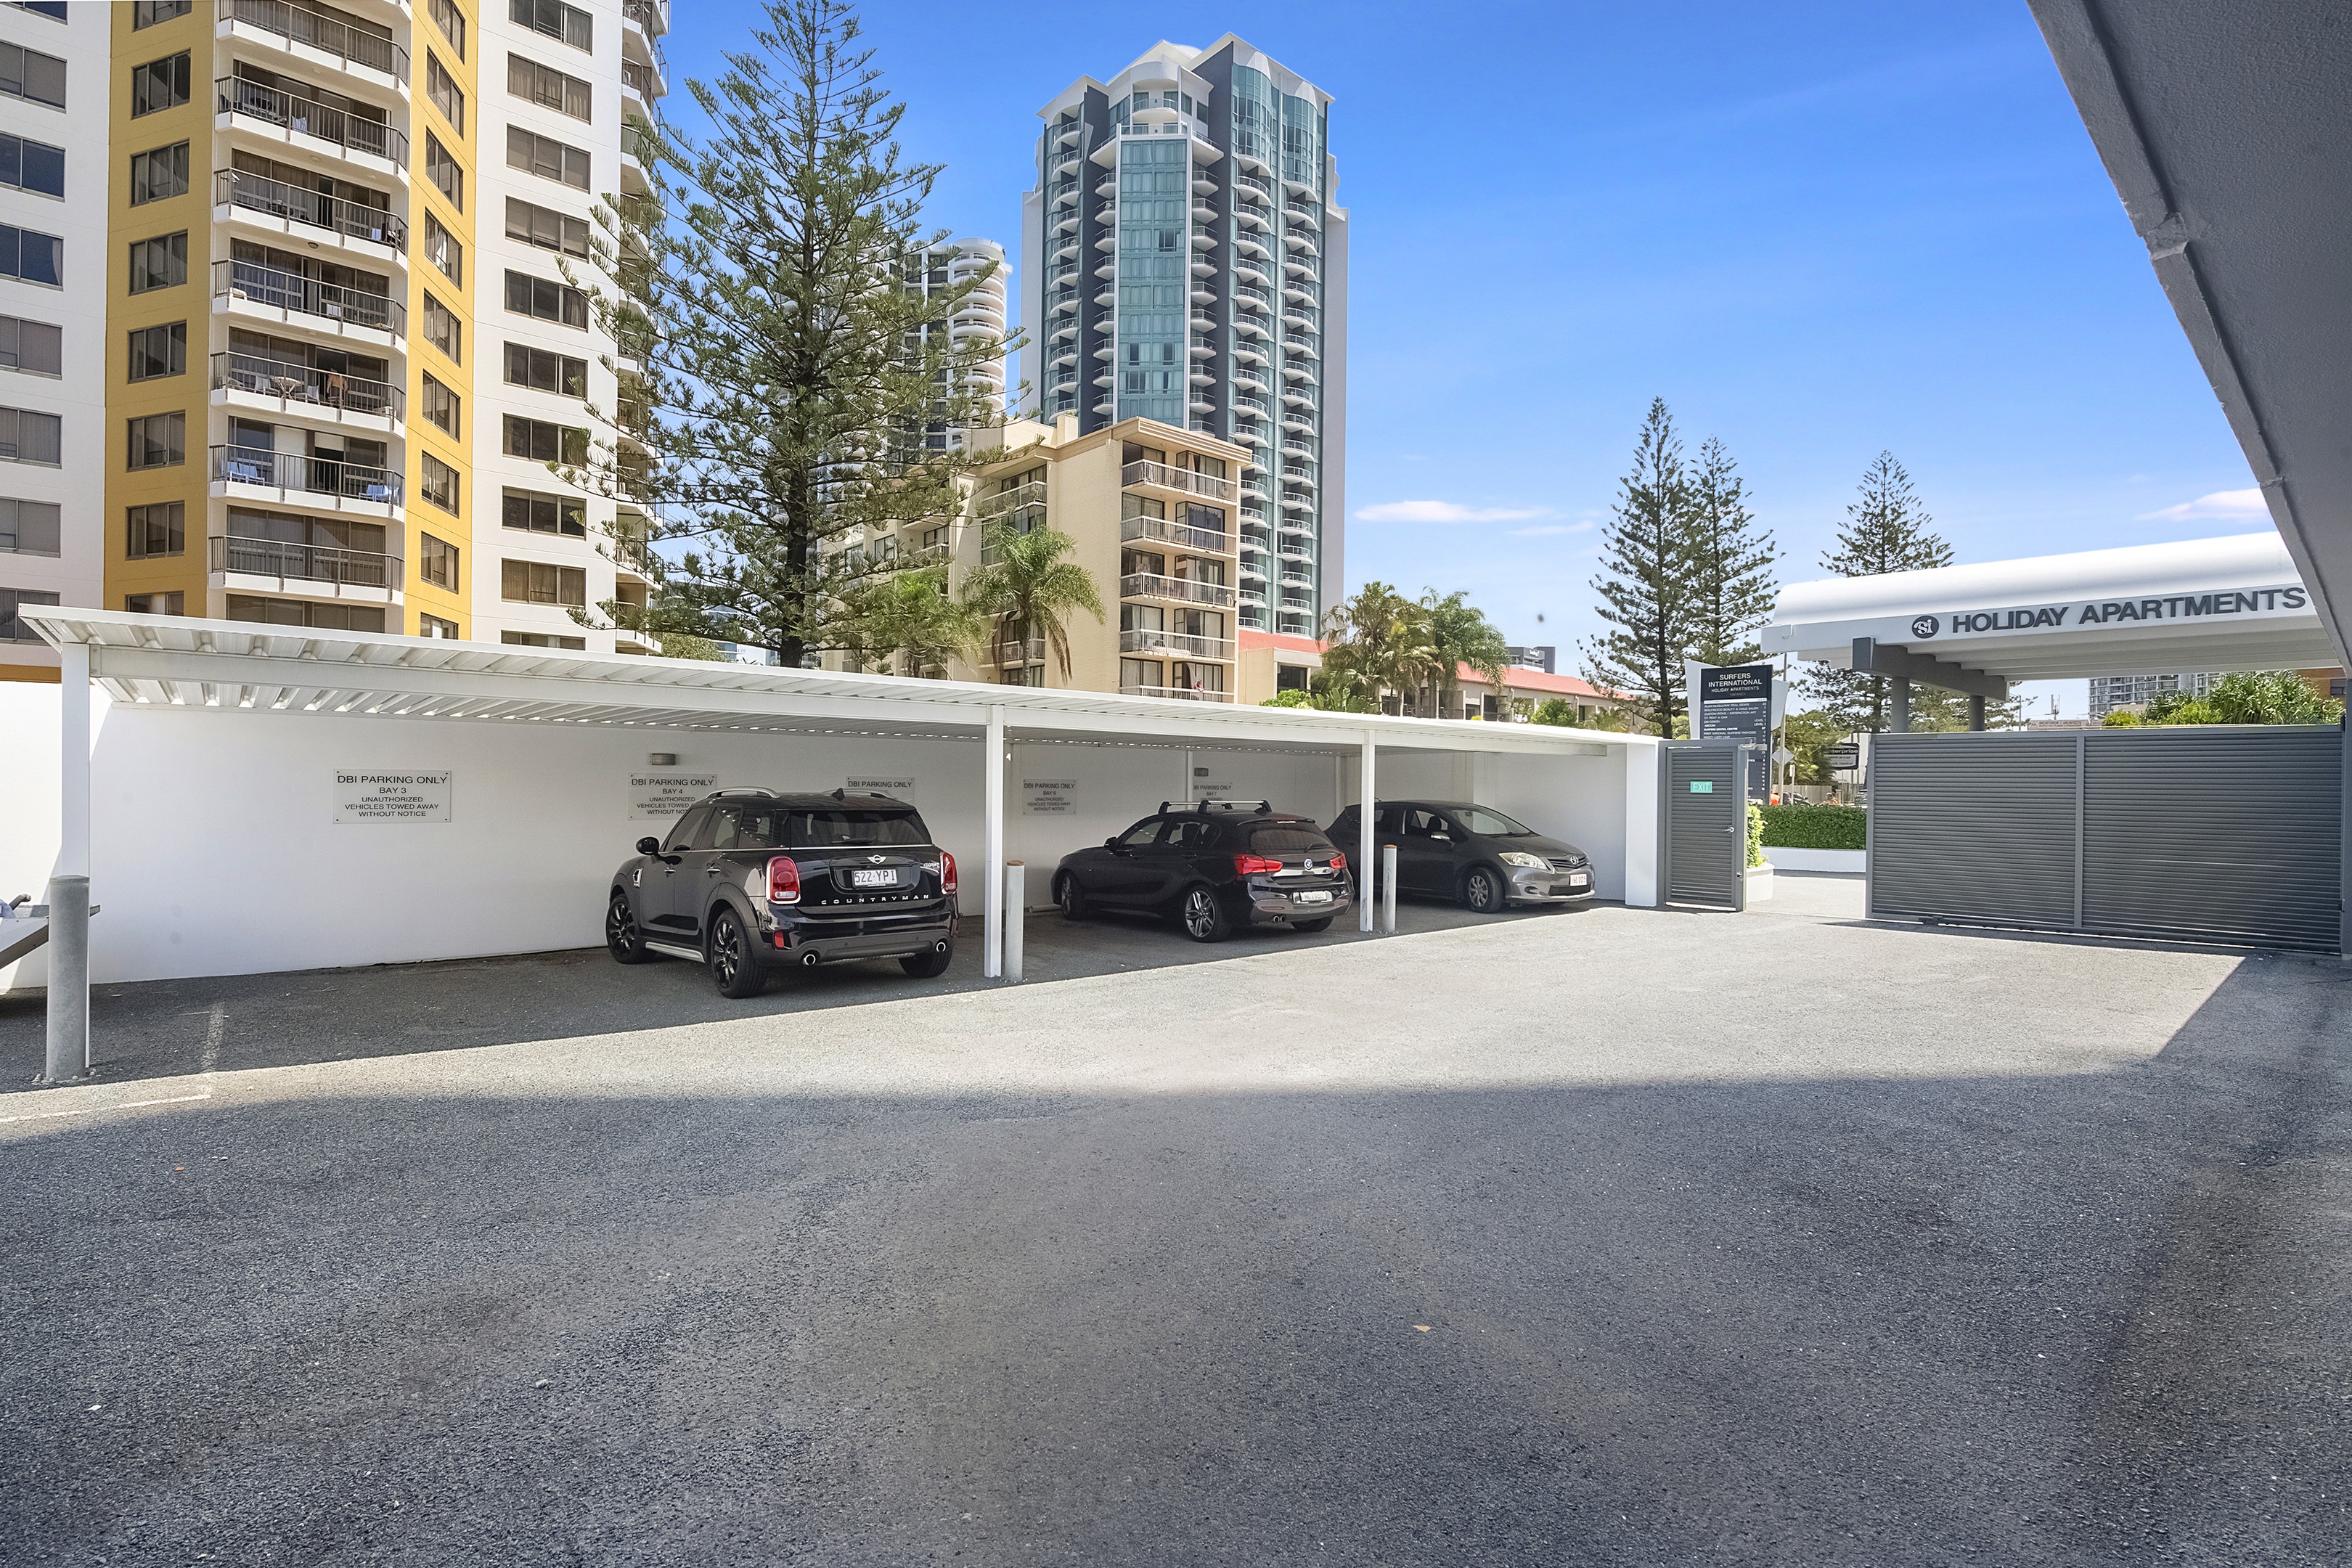 7,8,9,11,18 and 23/9 TRICKETT STREET, Surfers Paradise QLD 4217 - Office  For Lease